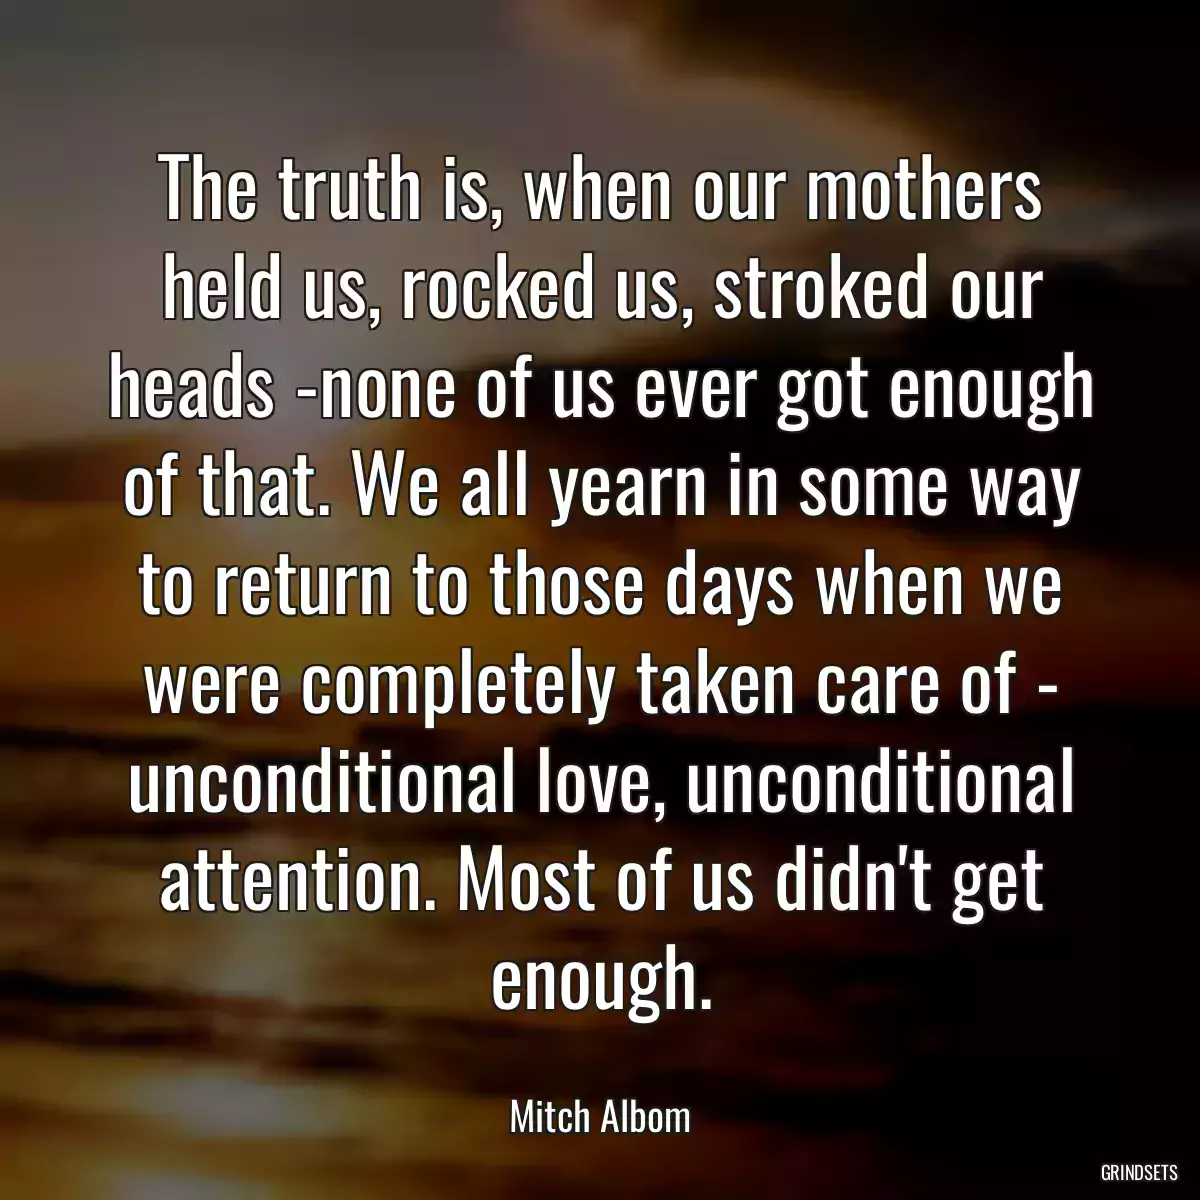 The truth is, when our mothers held us, rocked us, stroked our heads -none of us ever got enough of that. We all yearn in some way to return to those days when we were completely taken care of - unconditional love, unconditional attention. Most of us didn\'t get enough.